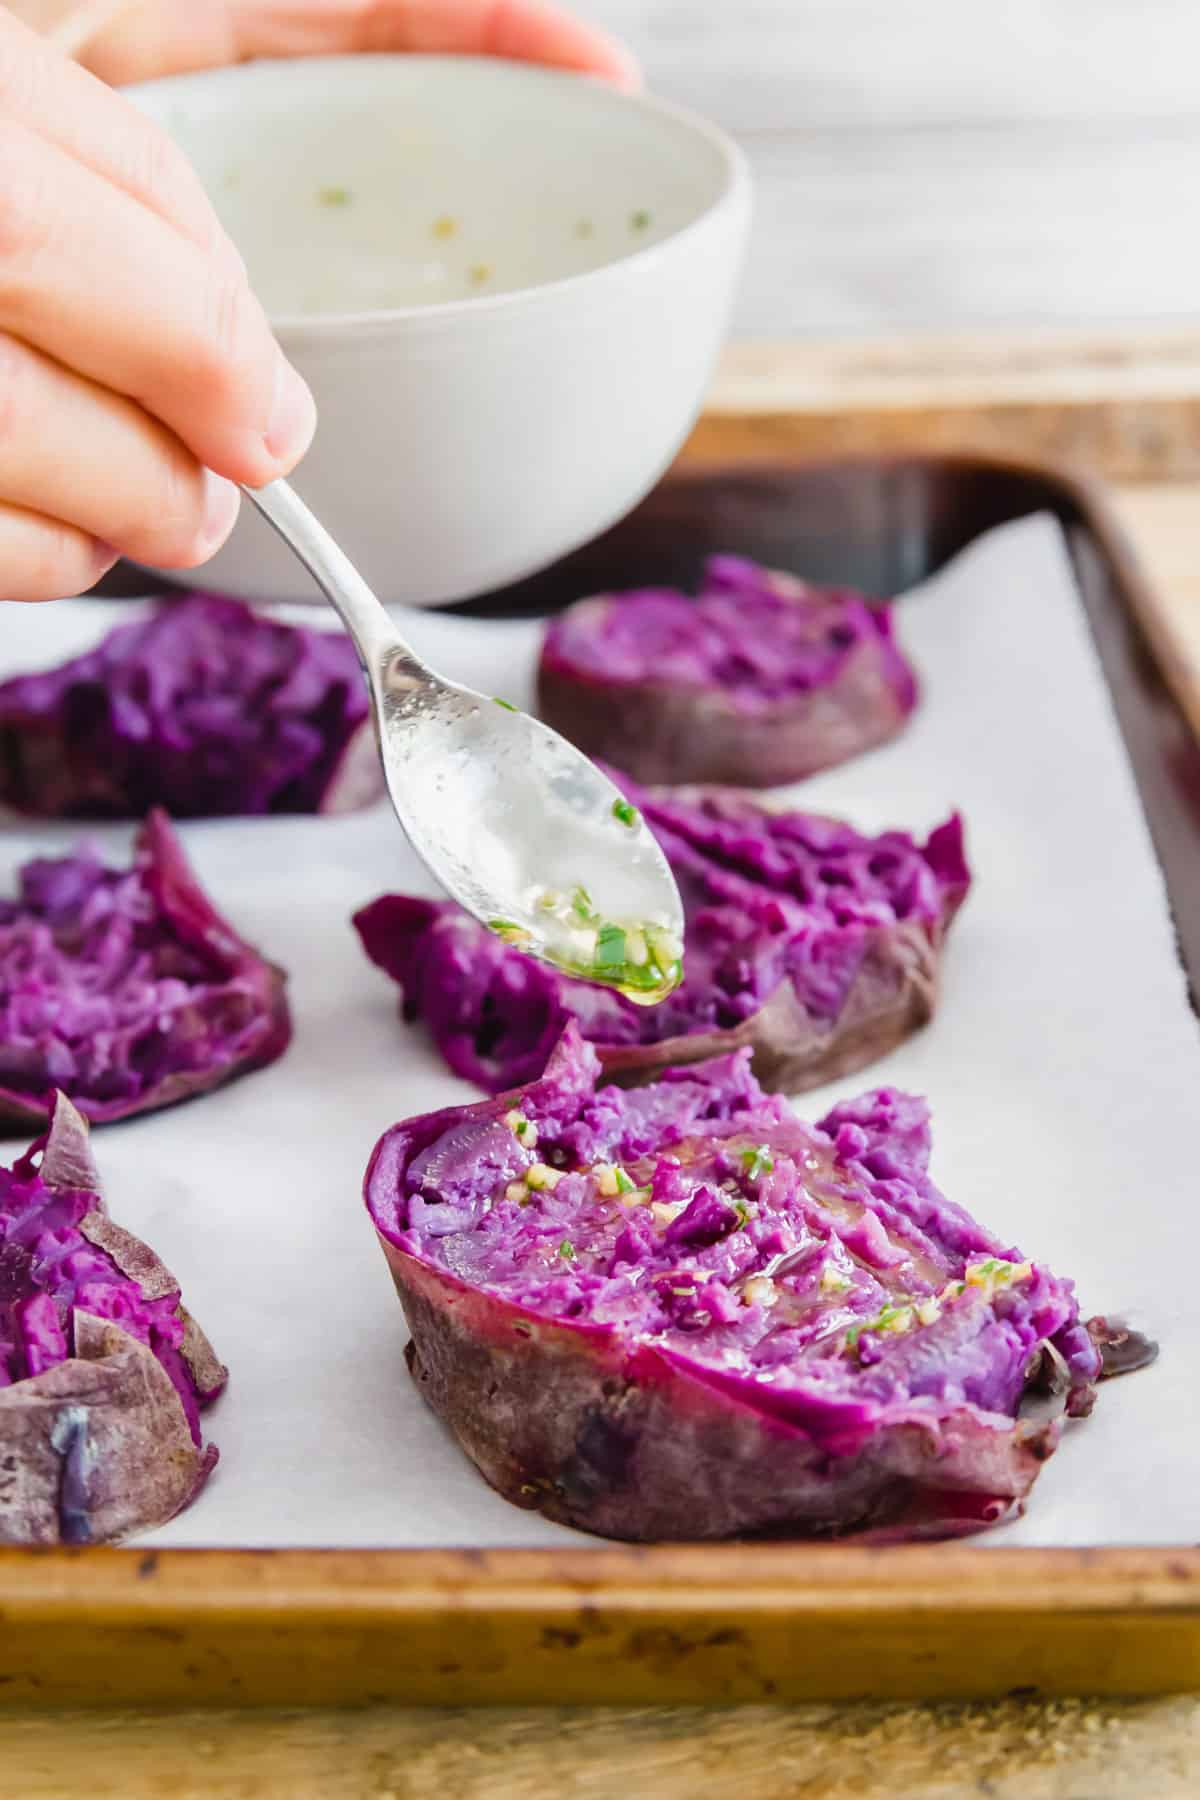 This easy purple sweet potato recipe smashed, drizzled with ghee and herbs and broiled until crispy is the perfect side dish to any meal.